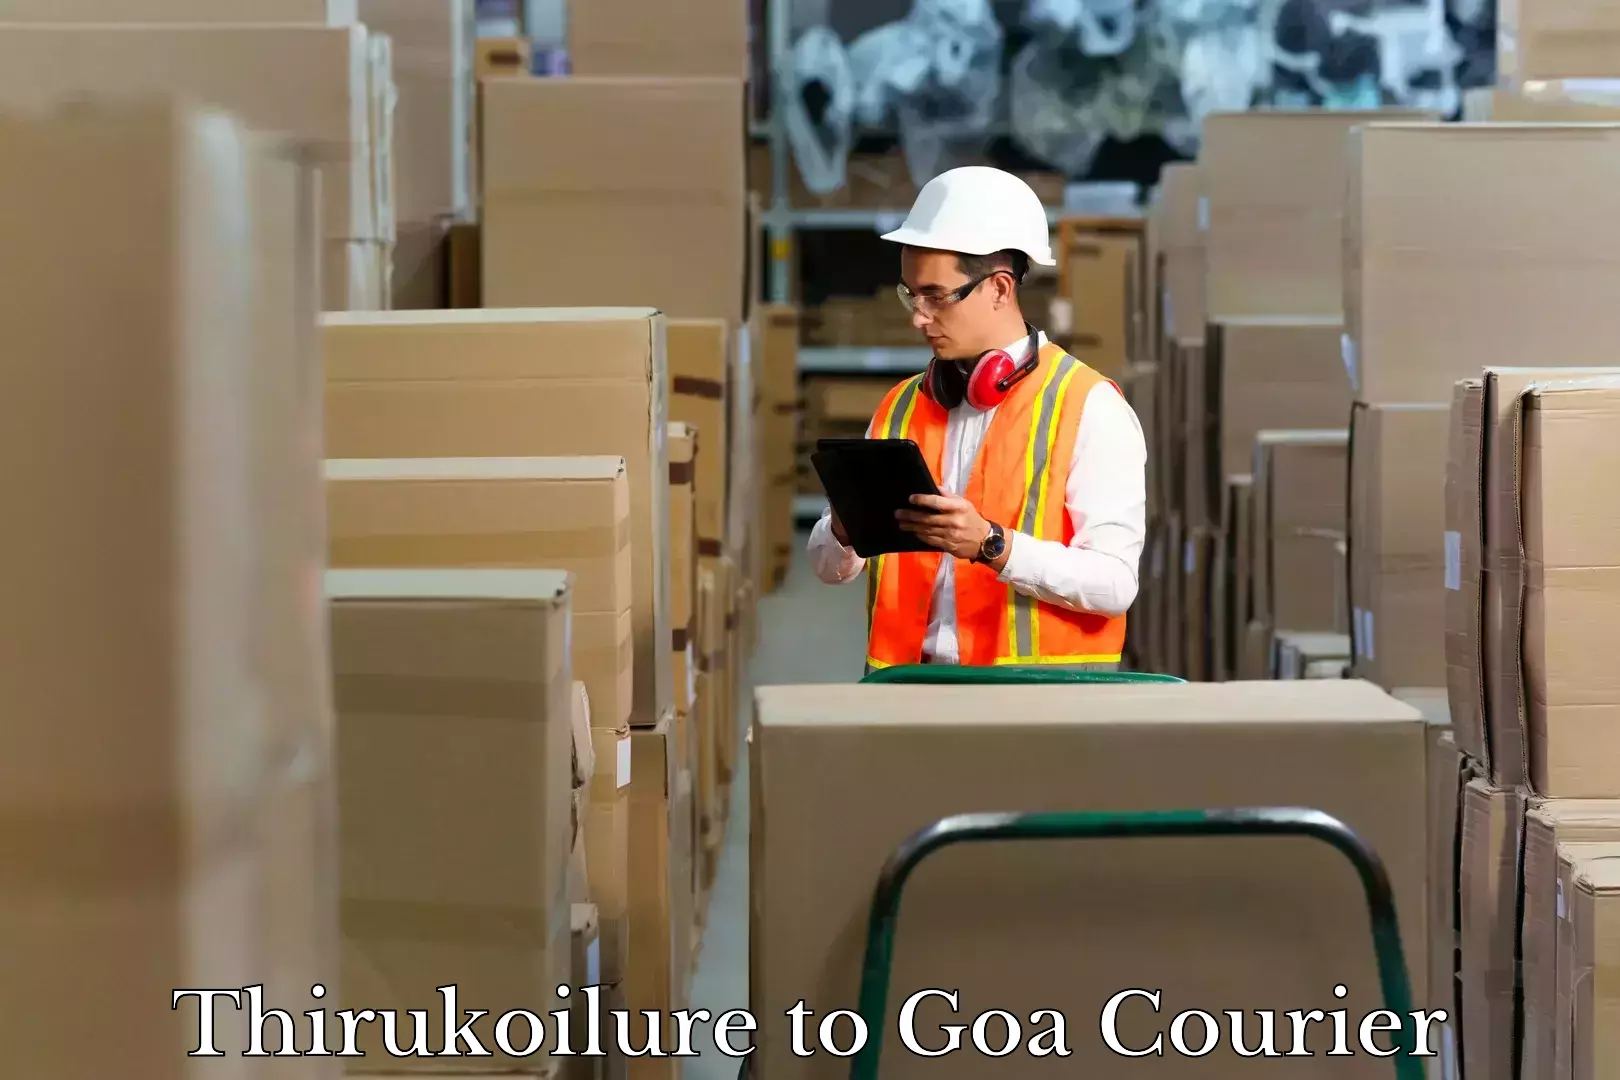 Instant baggage transport quote Thirukoilure to IIT Goa